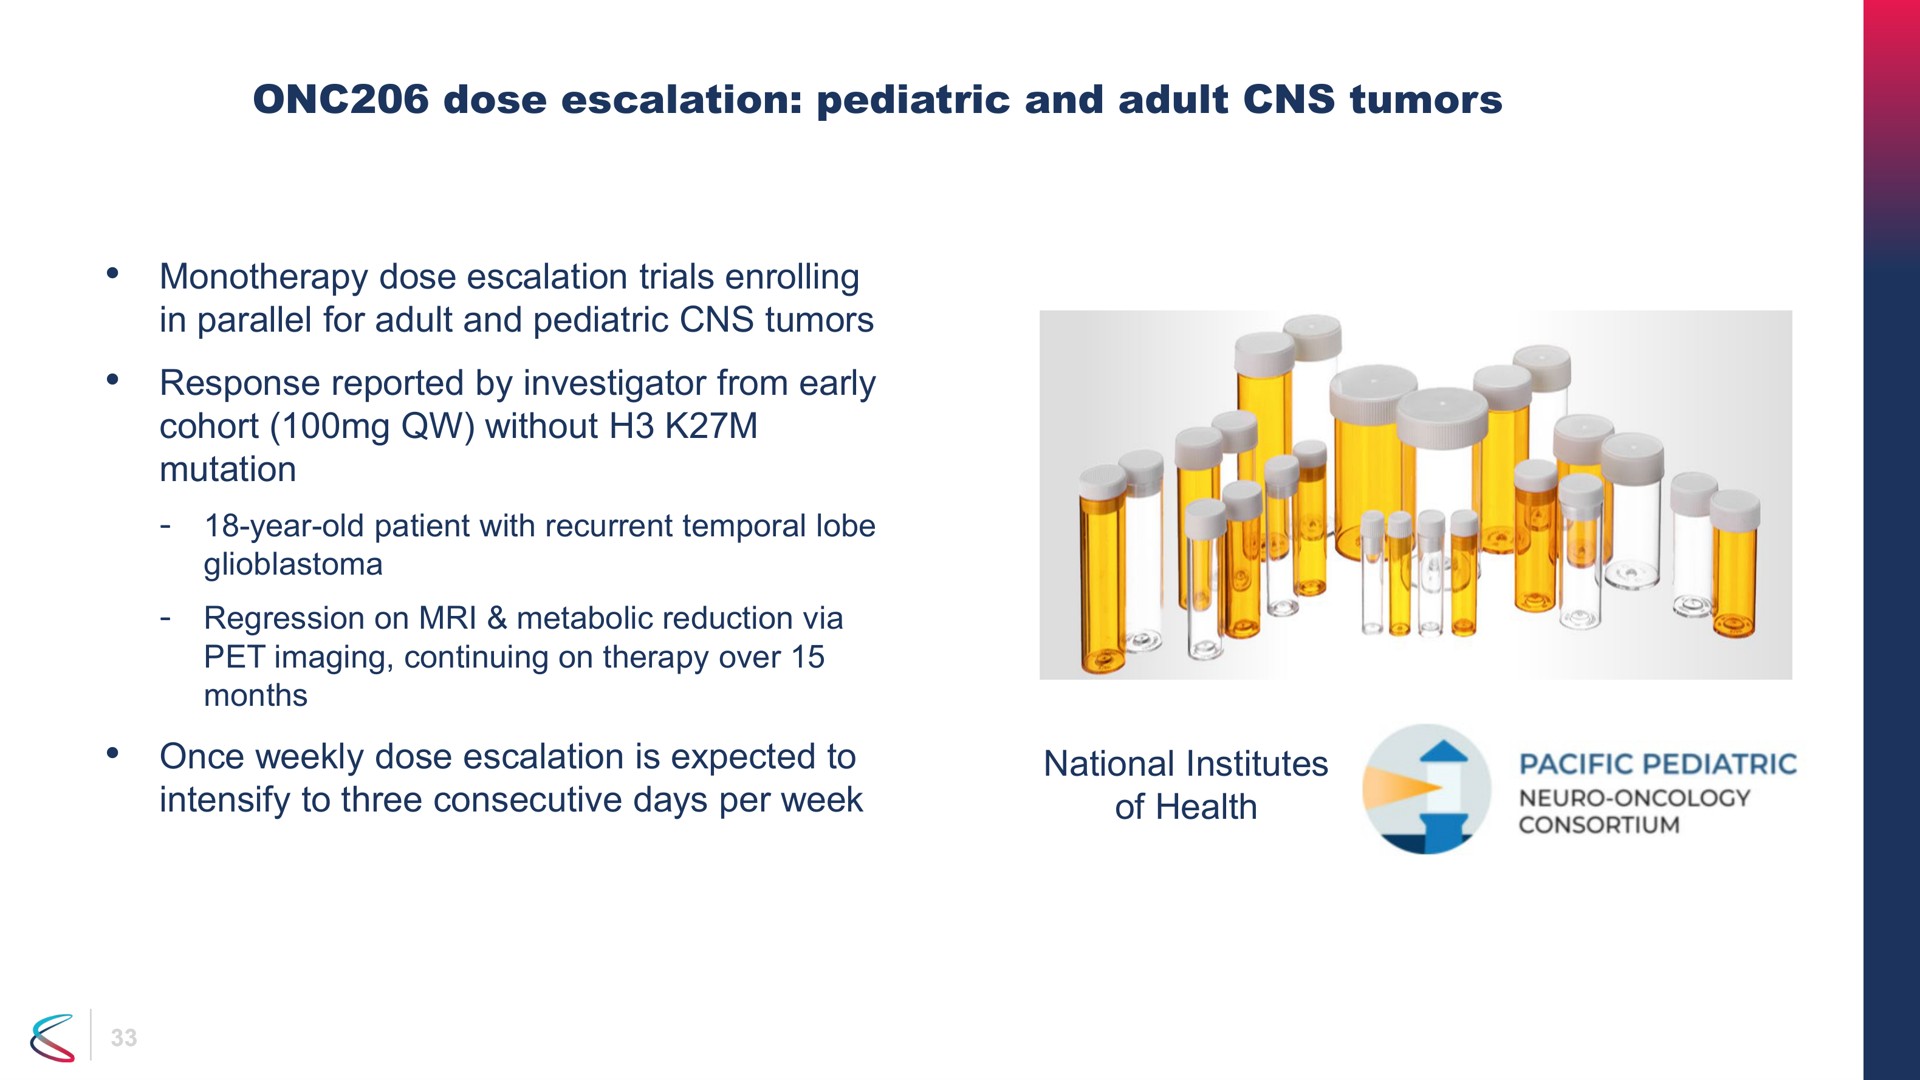 dose pediatric and adult tumors dose trials enrolling in parallel for adult and pediatric tumors response reported by investigator from early cohort without mutation once weekly dose is expected to intensify to three consecutive days per week national institutes of health pacific | Chimerix